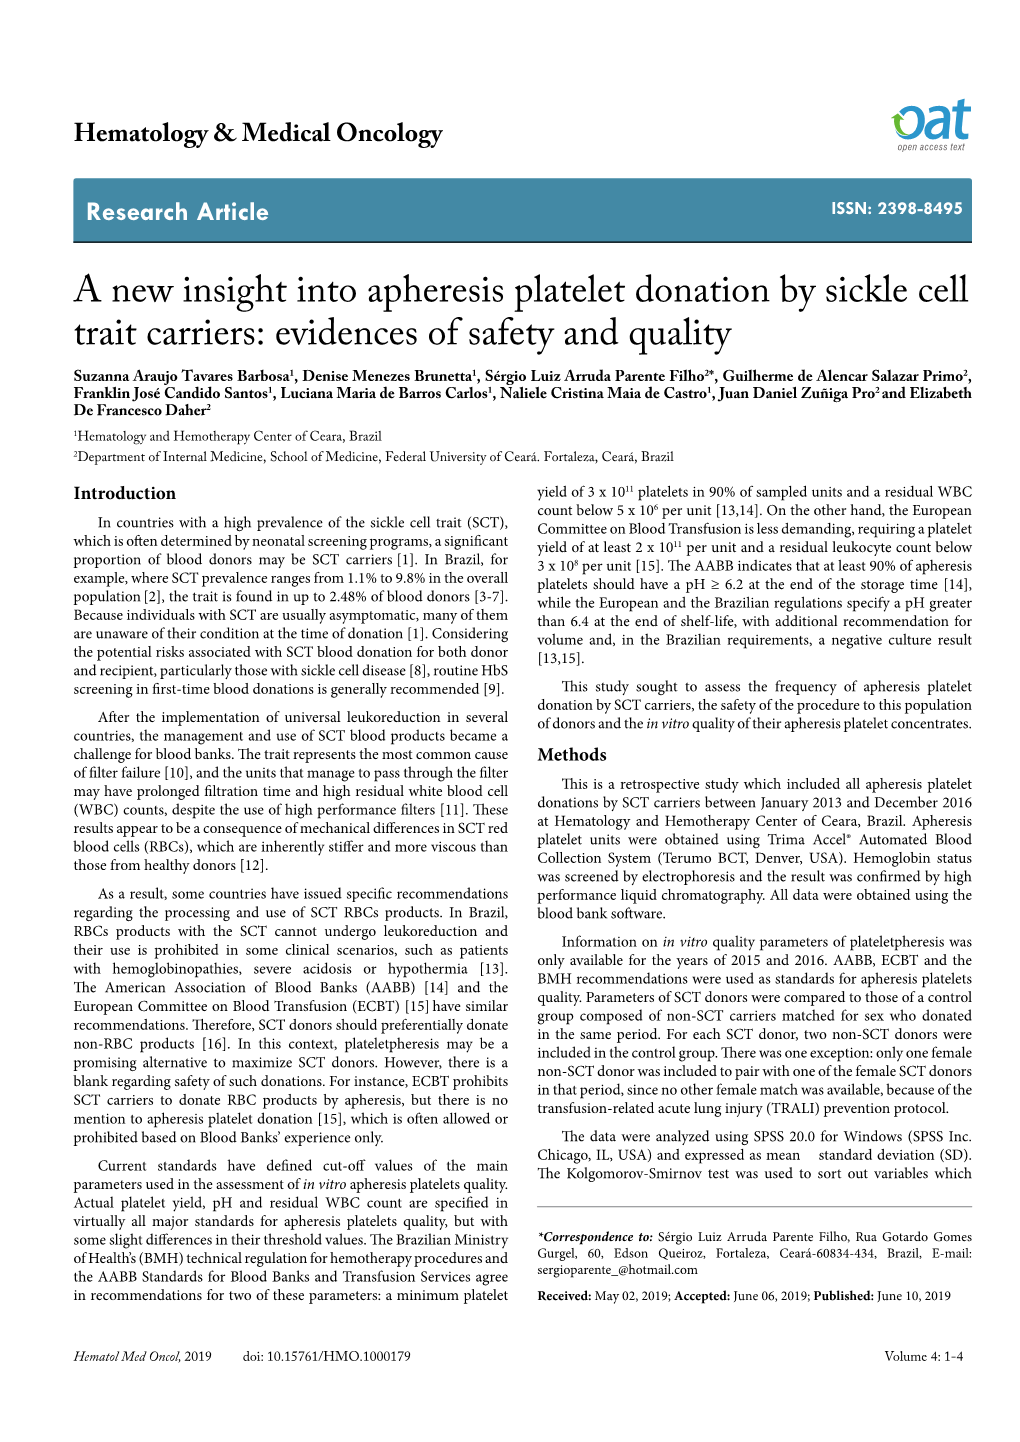 A New Insight Into Apheresis Platelet Donation by Sickle Cell Trait